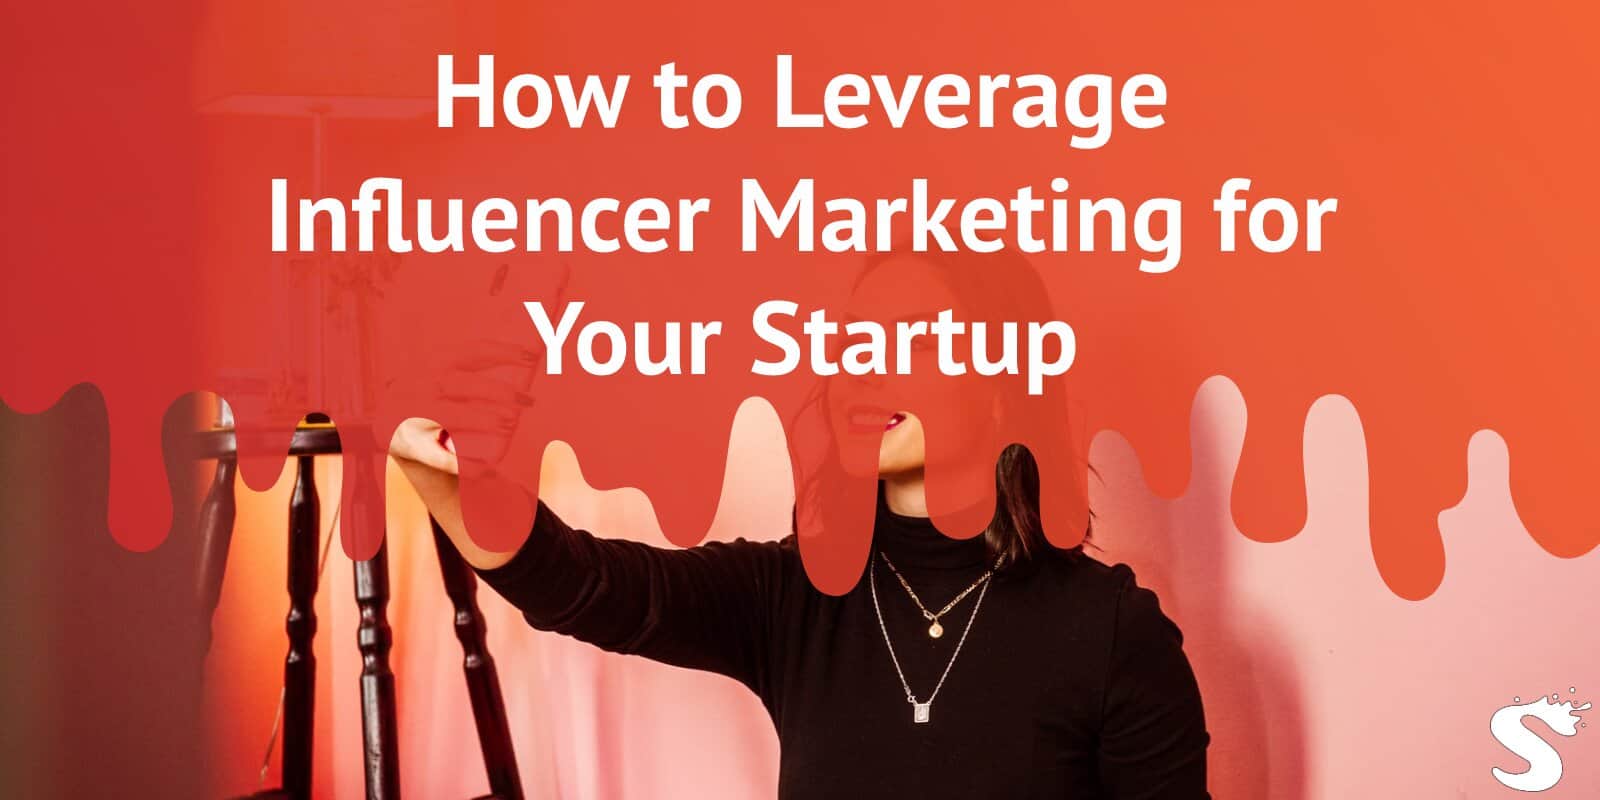 How to Leverage Influencer Marketing for Your Startup